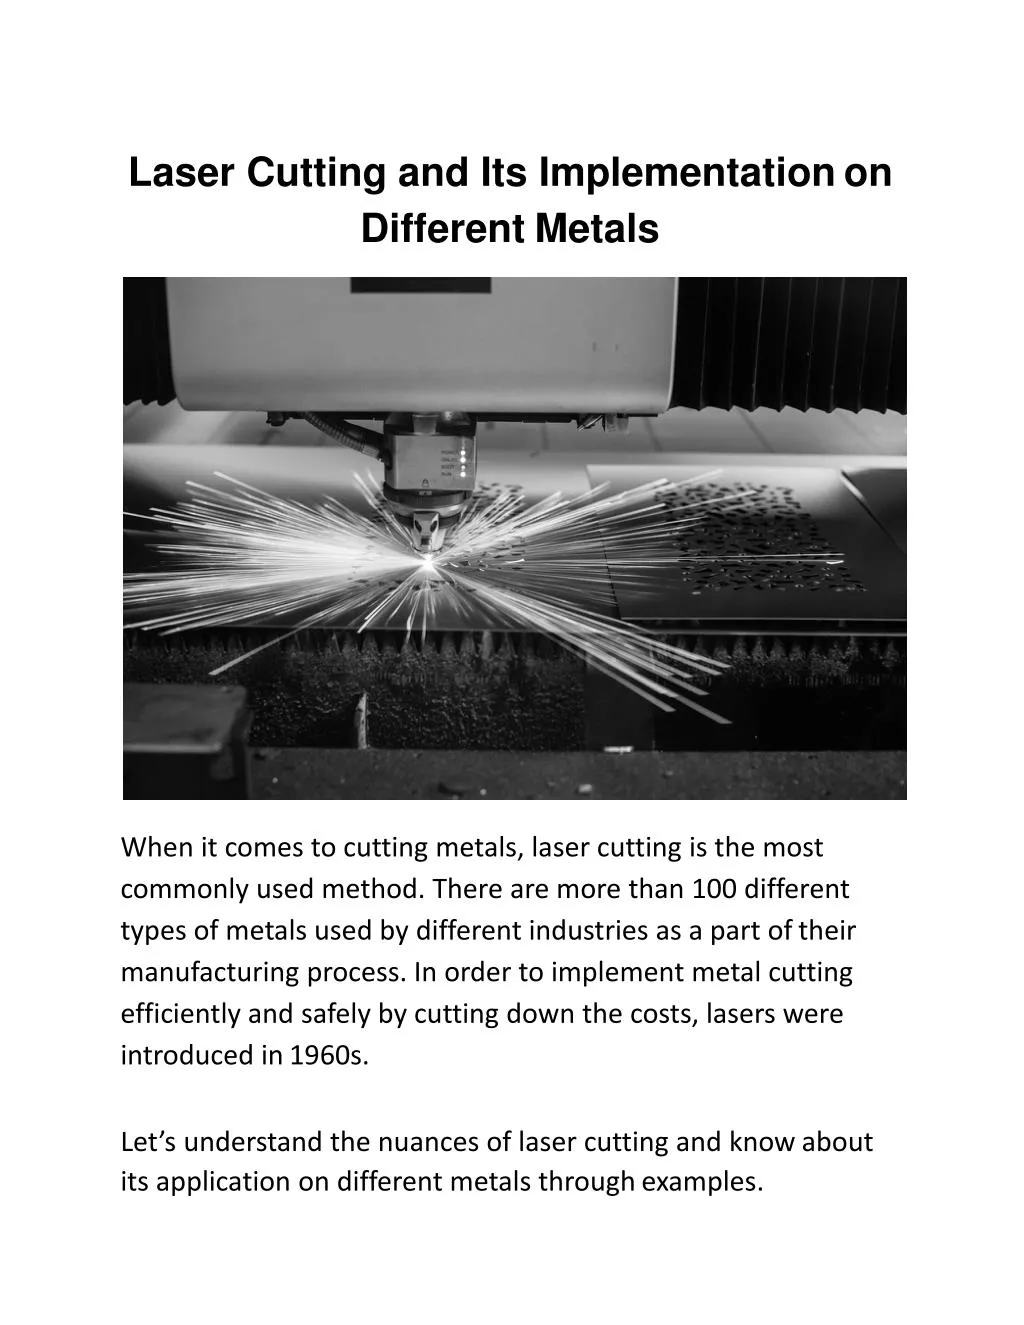 laser cutting and its implementation on different